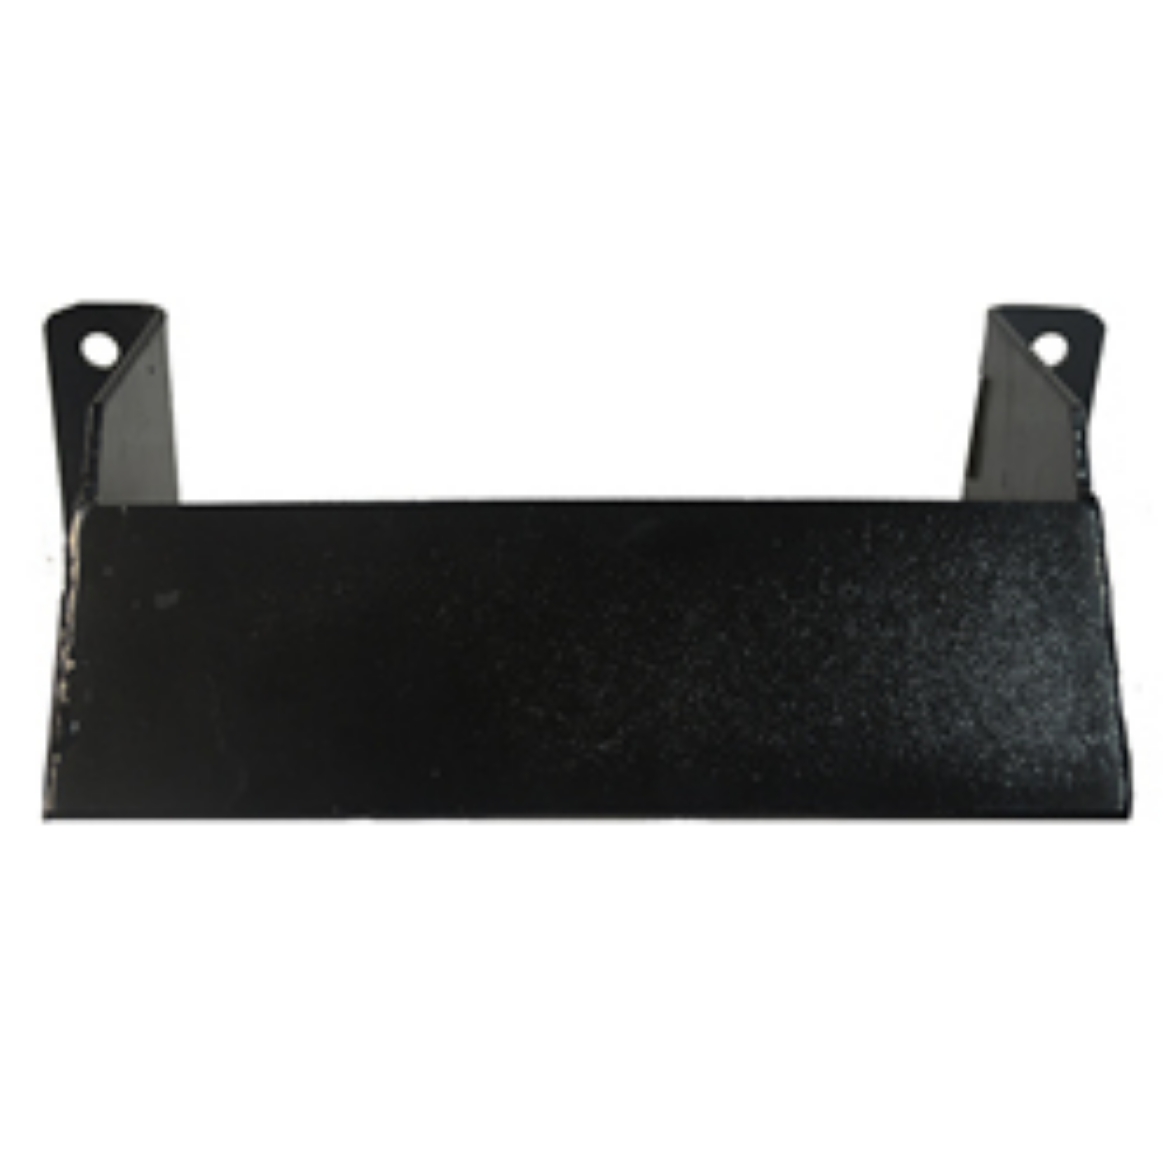 Picture of Metal Bracket to Suit 10704 Rubber Wheel Chock
195mm (W) x 130mm (D) x 60mm (H)
Has 4 Holes in Bracket for Bolting Down
Black in Colour